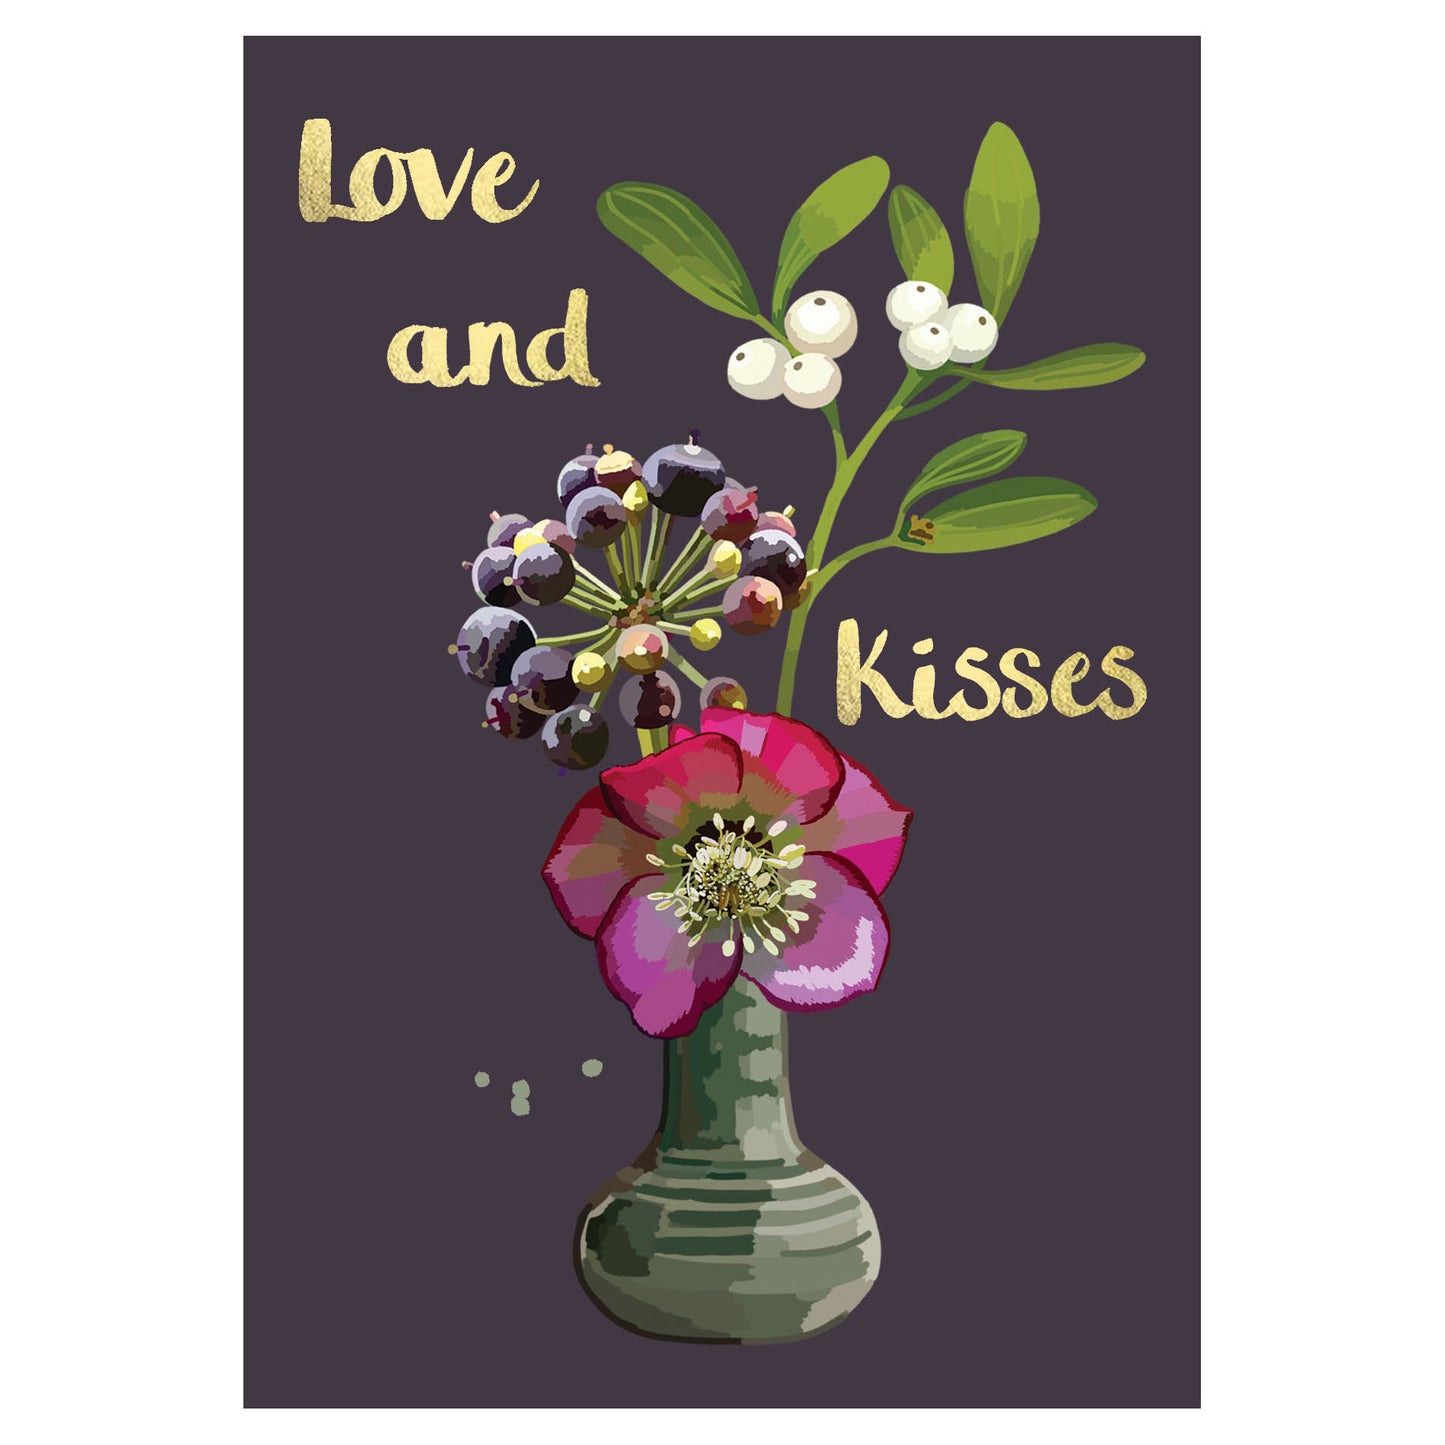 Love and Kisses Foiled Floral Greeting Card